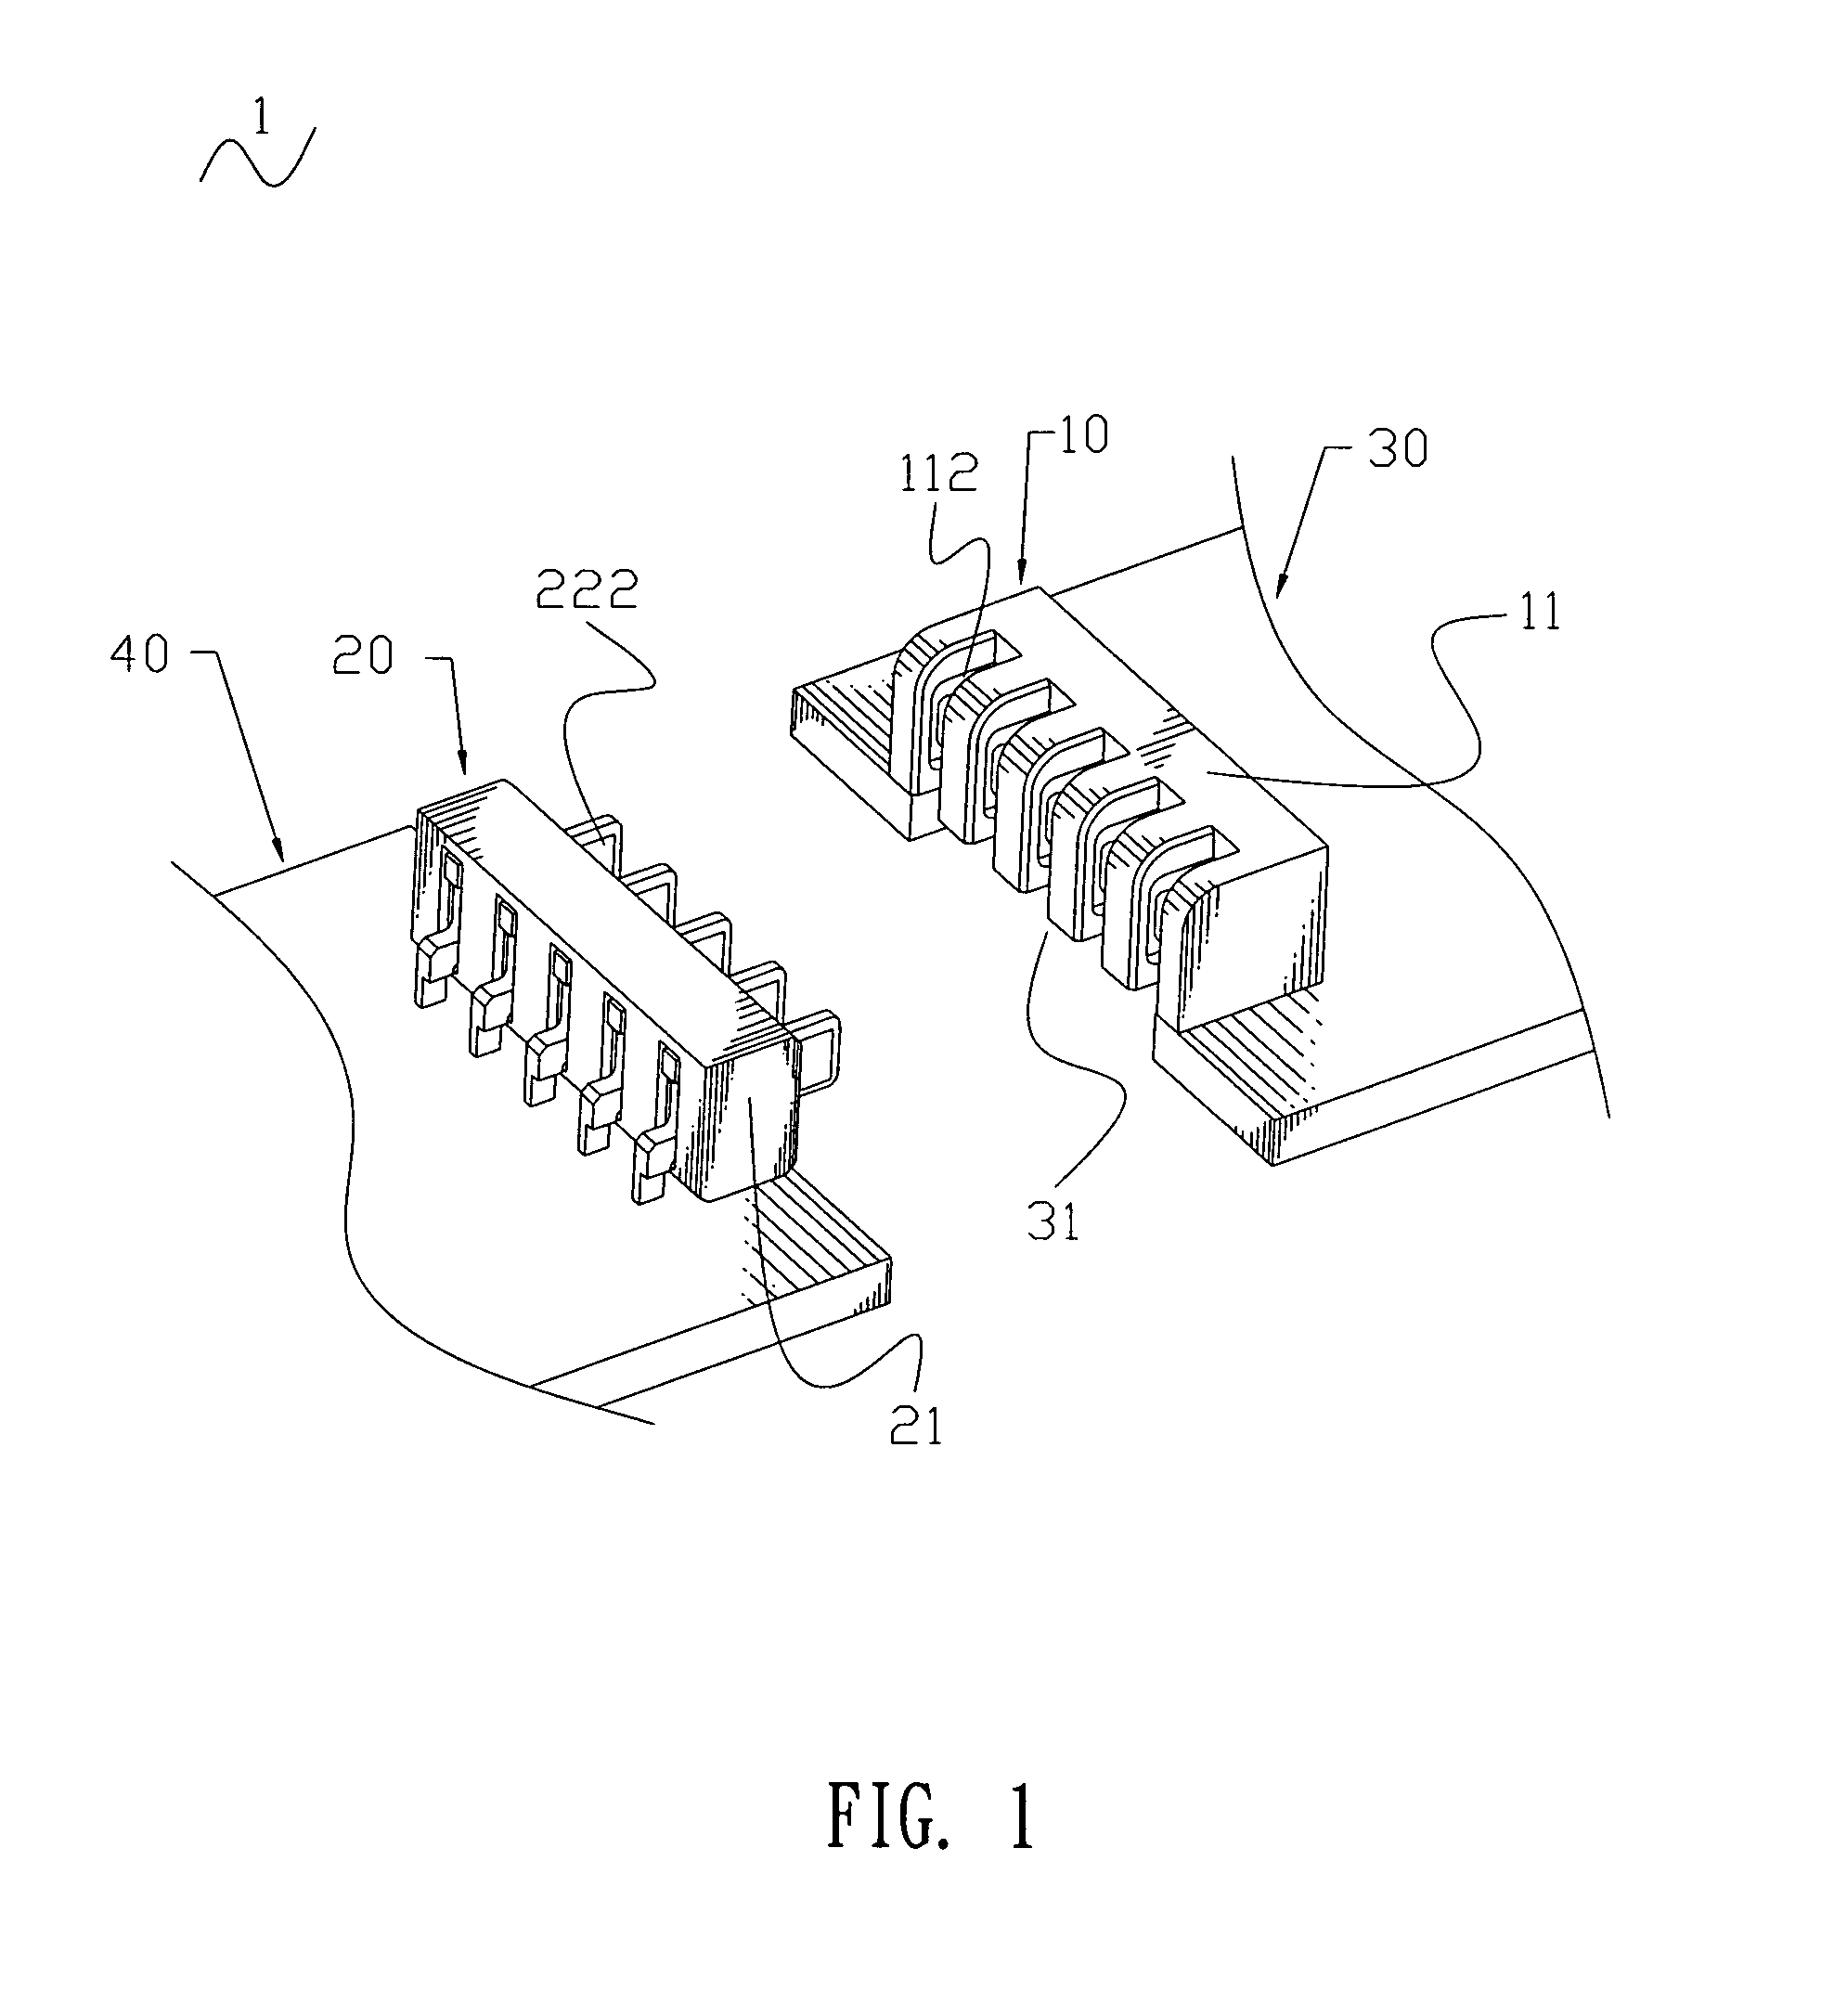 Combination of connector assembly and two printed circuit boards